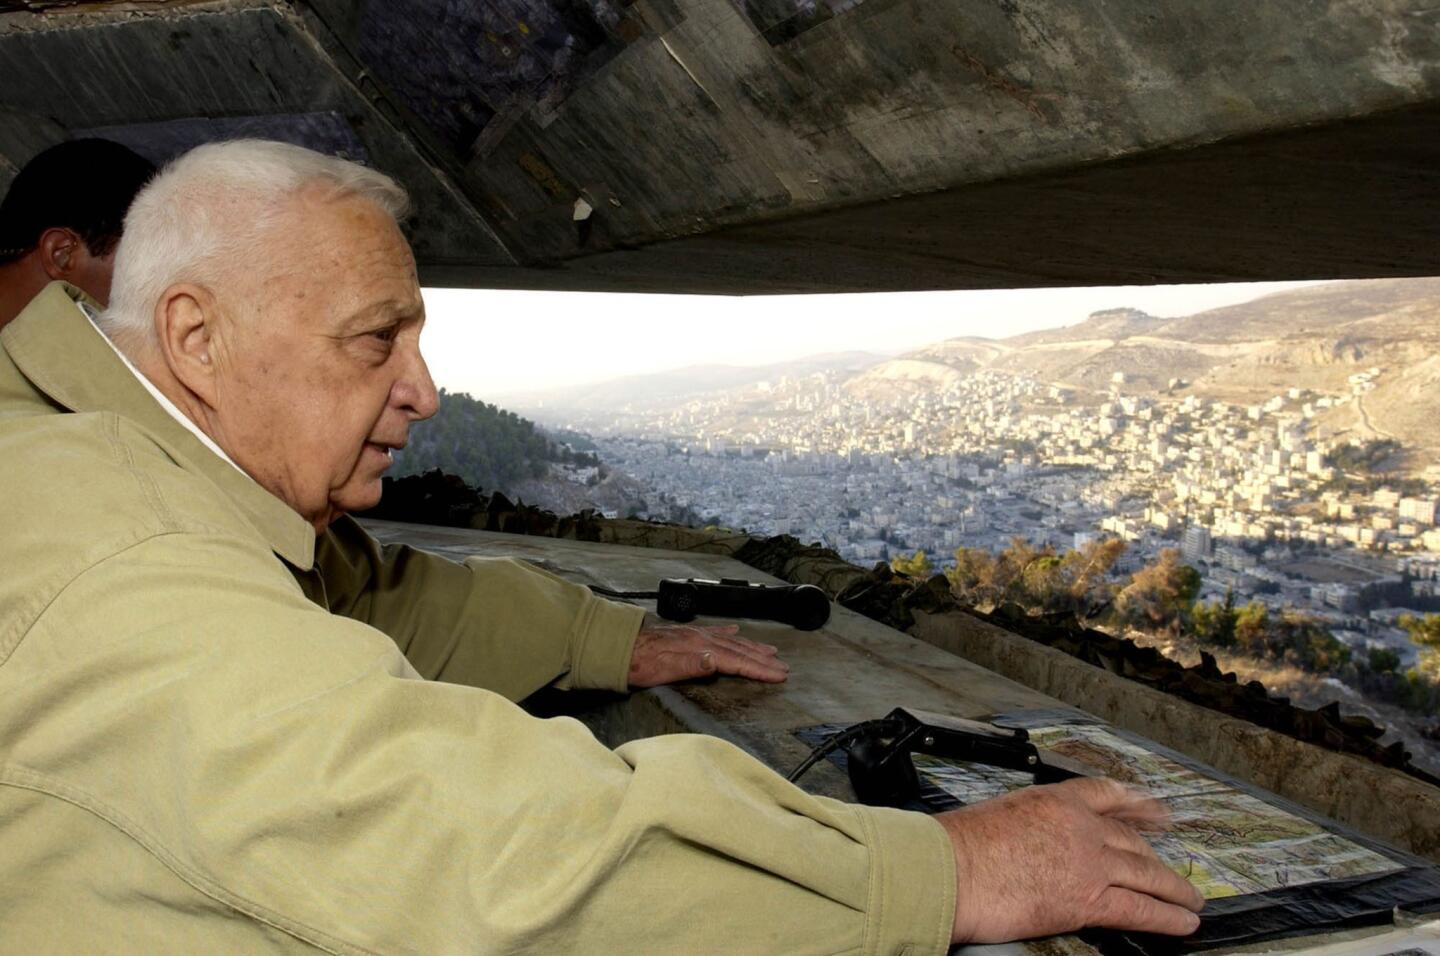 Prime Minister Sharon looks at the West Bank town of Nablus during a November 2002 visit to the Tel Fares observation point that overlooks the Palestinian town. In the spring of that year, Sharon responded to a relentless series of suicide bombings in Israeli cities with Israel's most sweeping military offensive since the 1967 war, sending the army into all the major population centers of the West Bank.